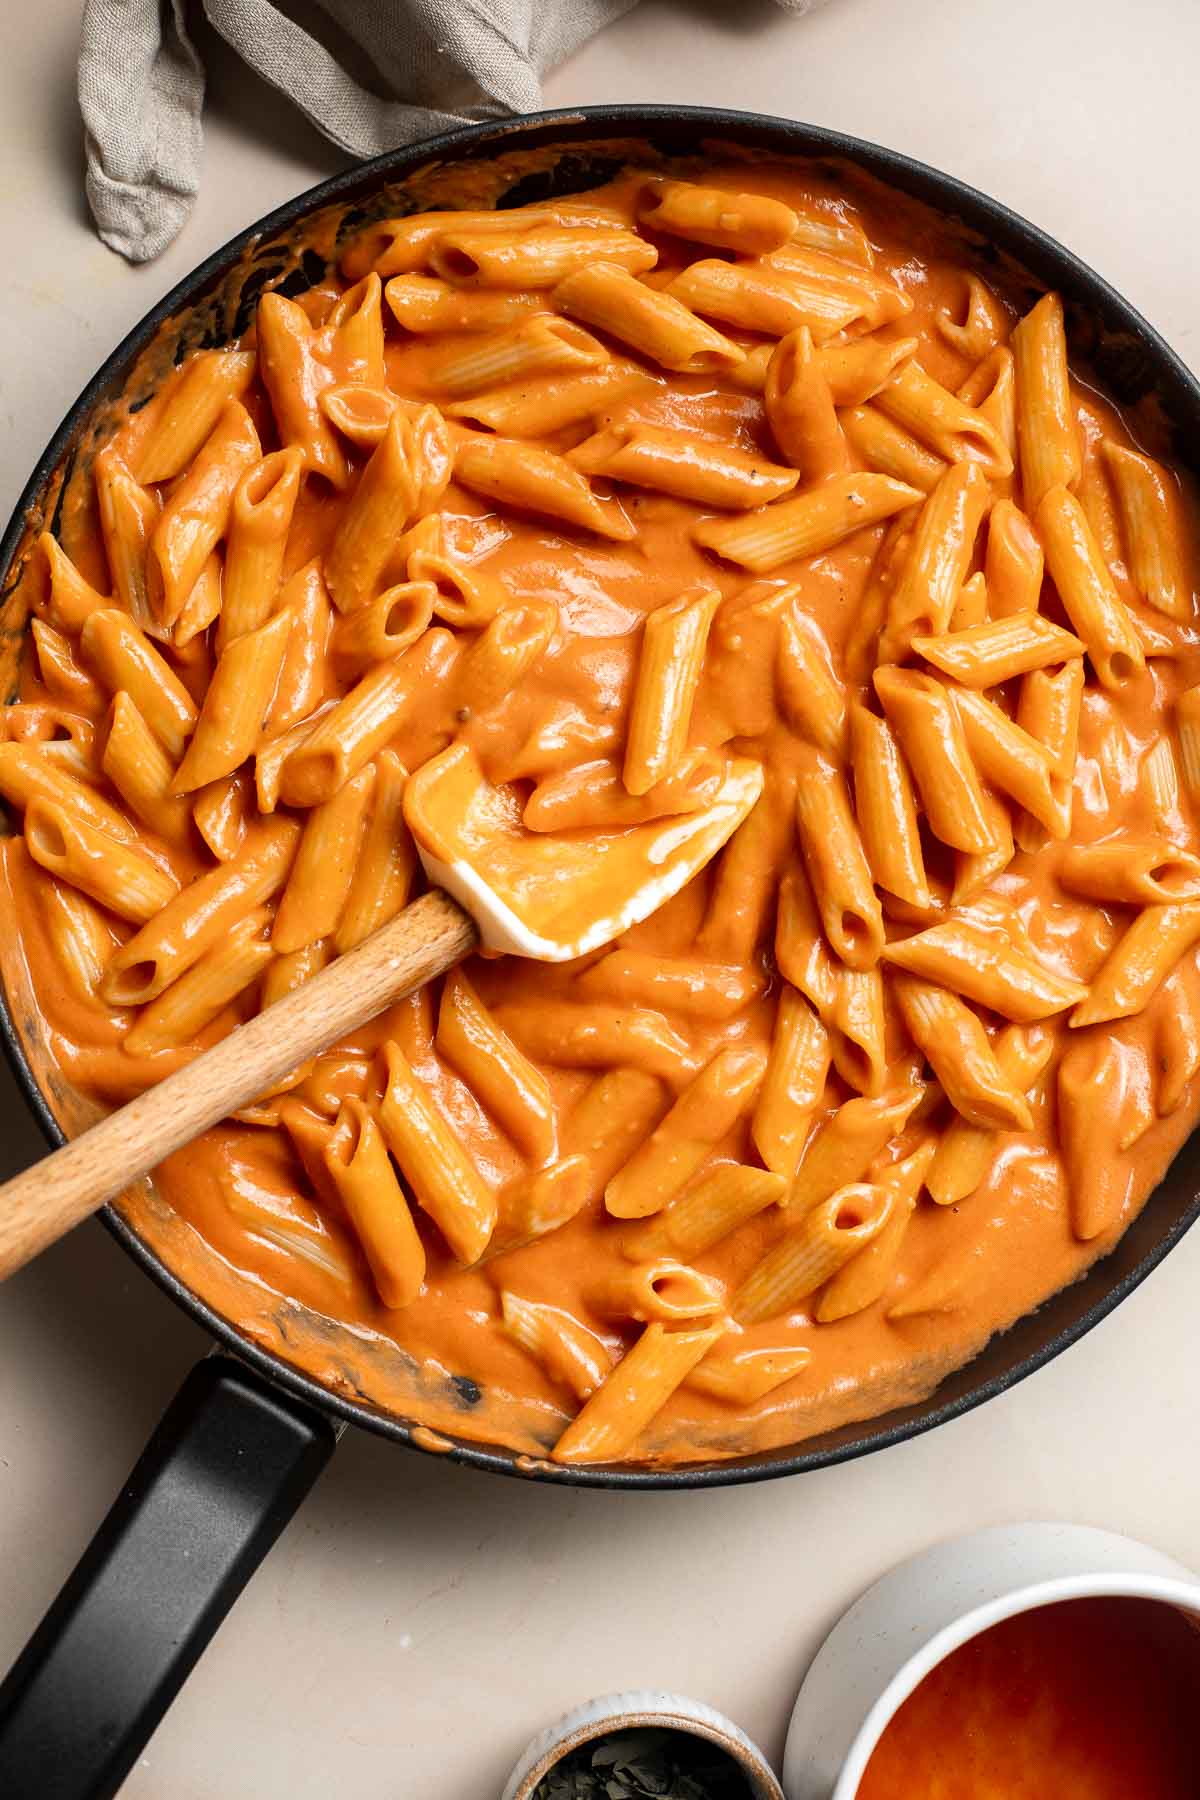 This Creamy Tomato Pasta is a simple and delicious meal made from scratch in 25 minutes with a cream and tomato based sauce that is rich and silky smooth. | aheadofthyme.com